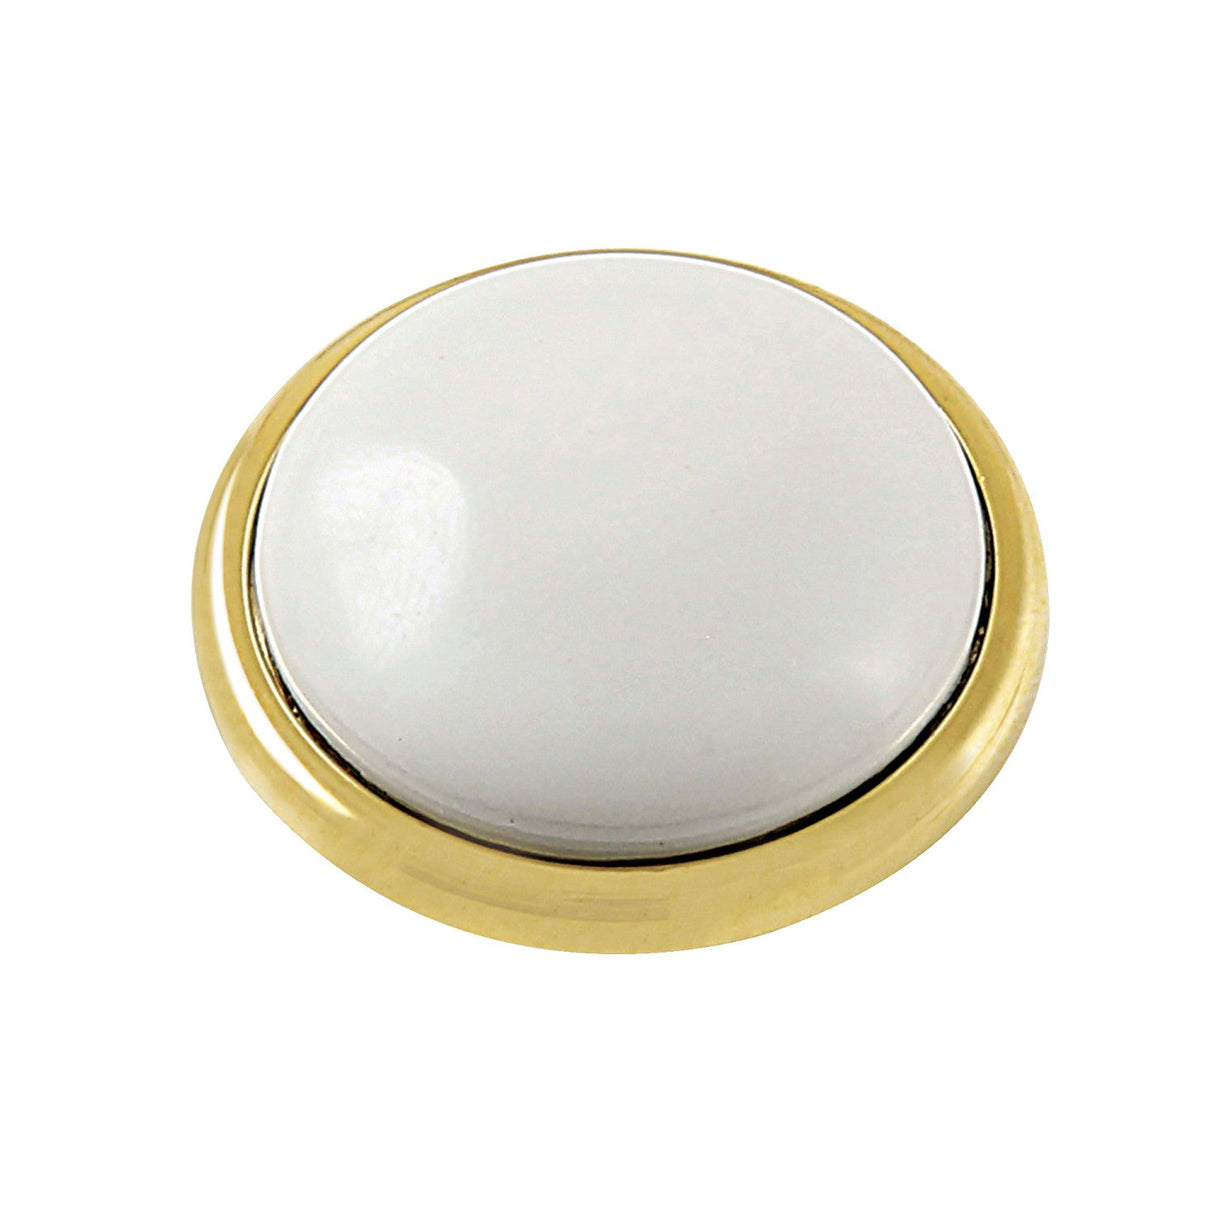 KSHI7822TL Blank Handle Index Button, Polished Brass